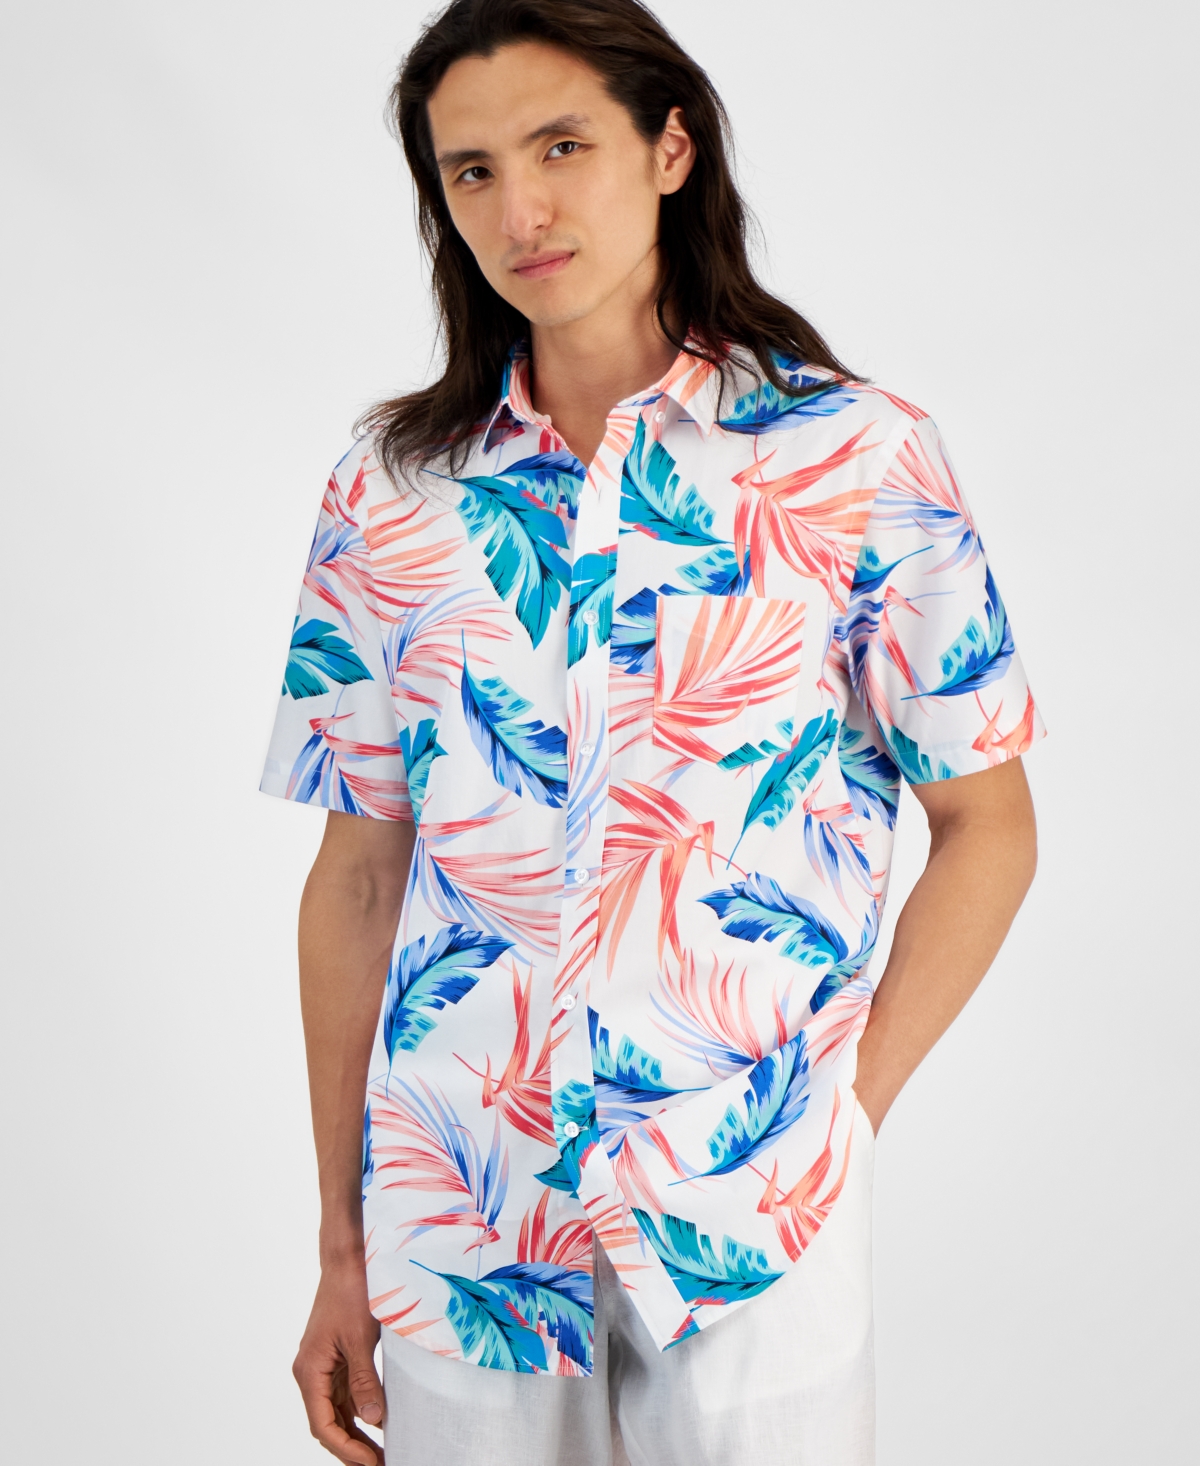 Men's Summer Leaf Regular-Fit Stretch Tropical-Print Button-Down Poplin Shirt, Created for Macy's - Bright White